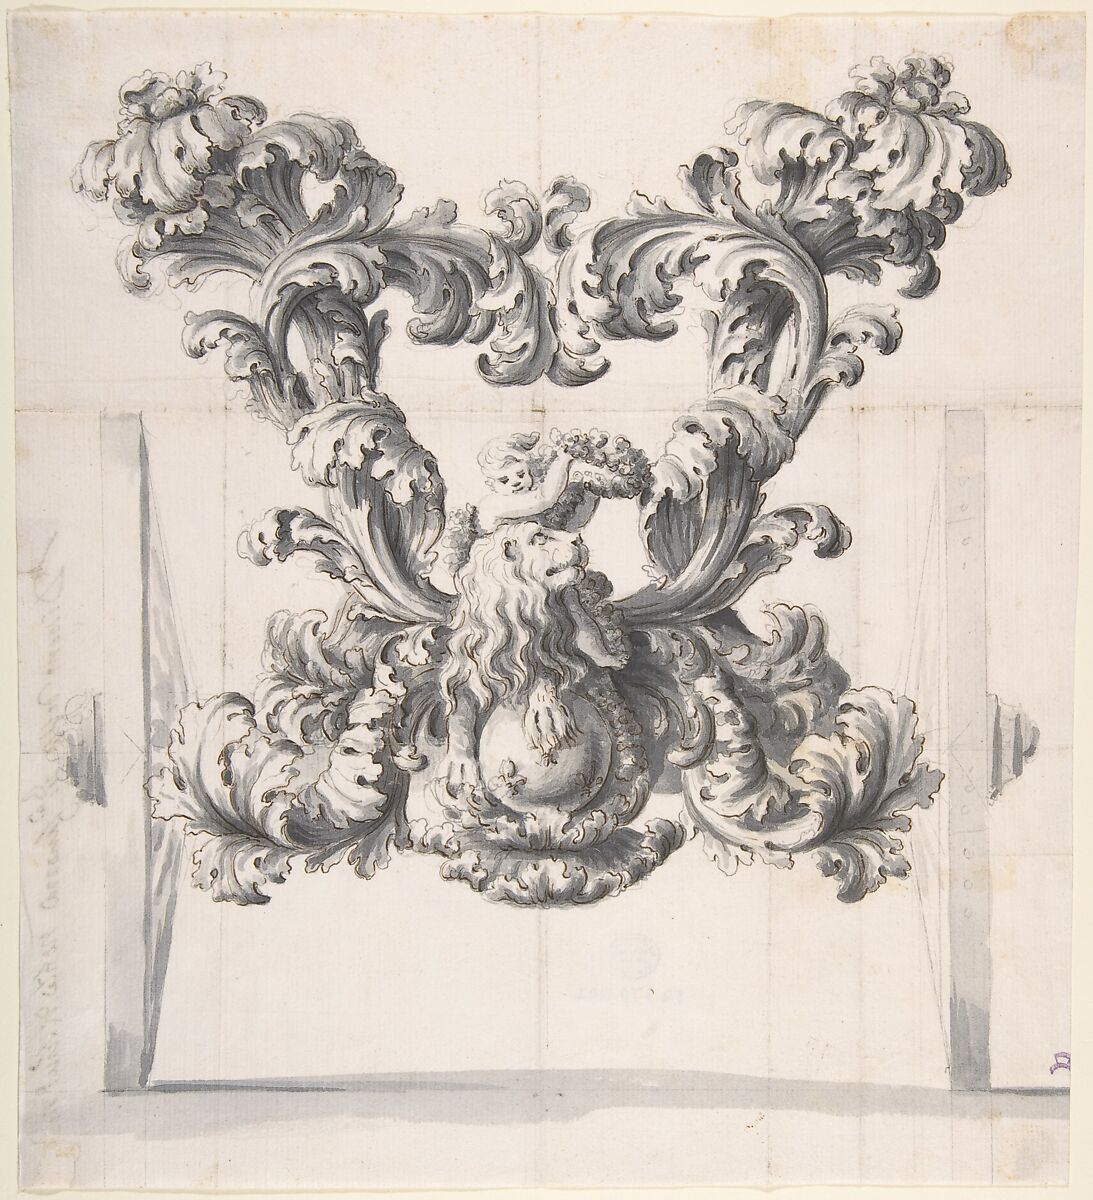 Rear View of an Elaborate Design for a Carriage with Acanthus Leaves and a Putto and Lion on top of a Ball with Three Fleurs-de-Lis, Anonymous, Italian, late 17th to early 18th century, Pen and brown ink, gray wash, over leadpoint 